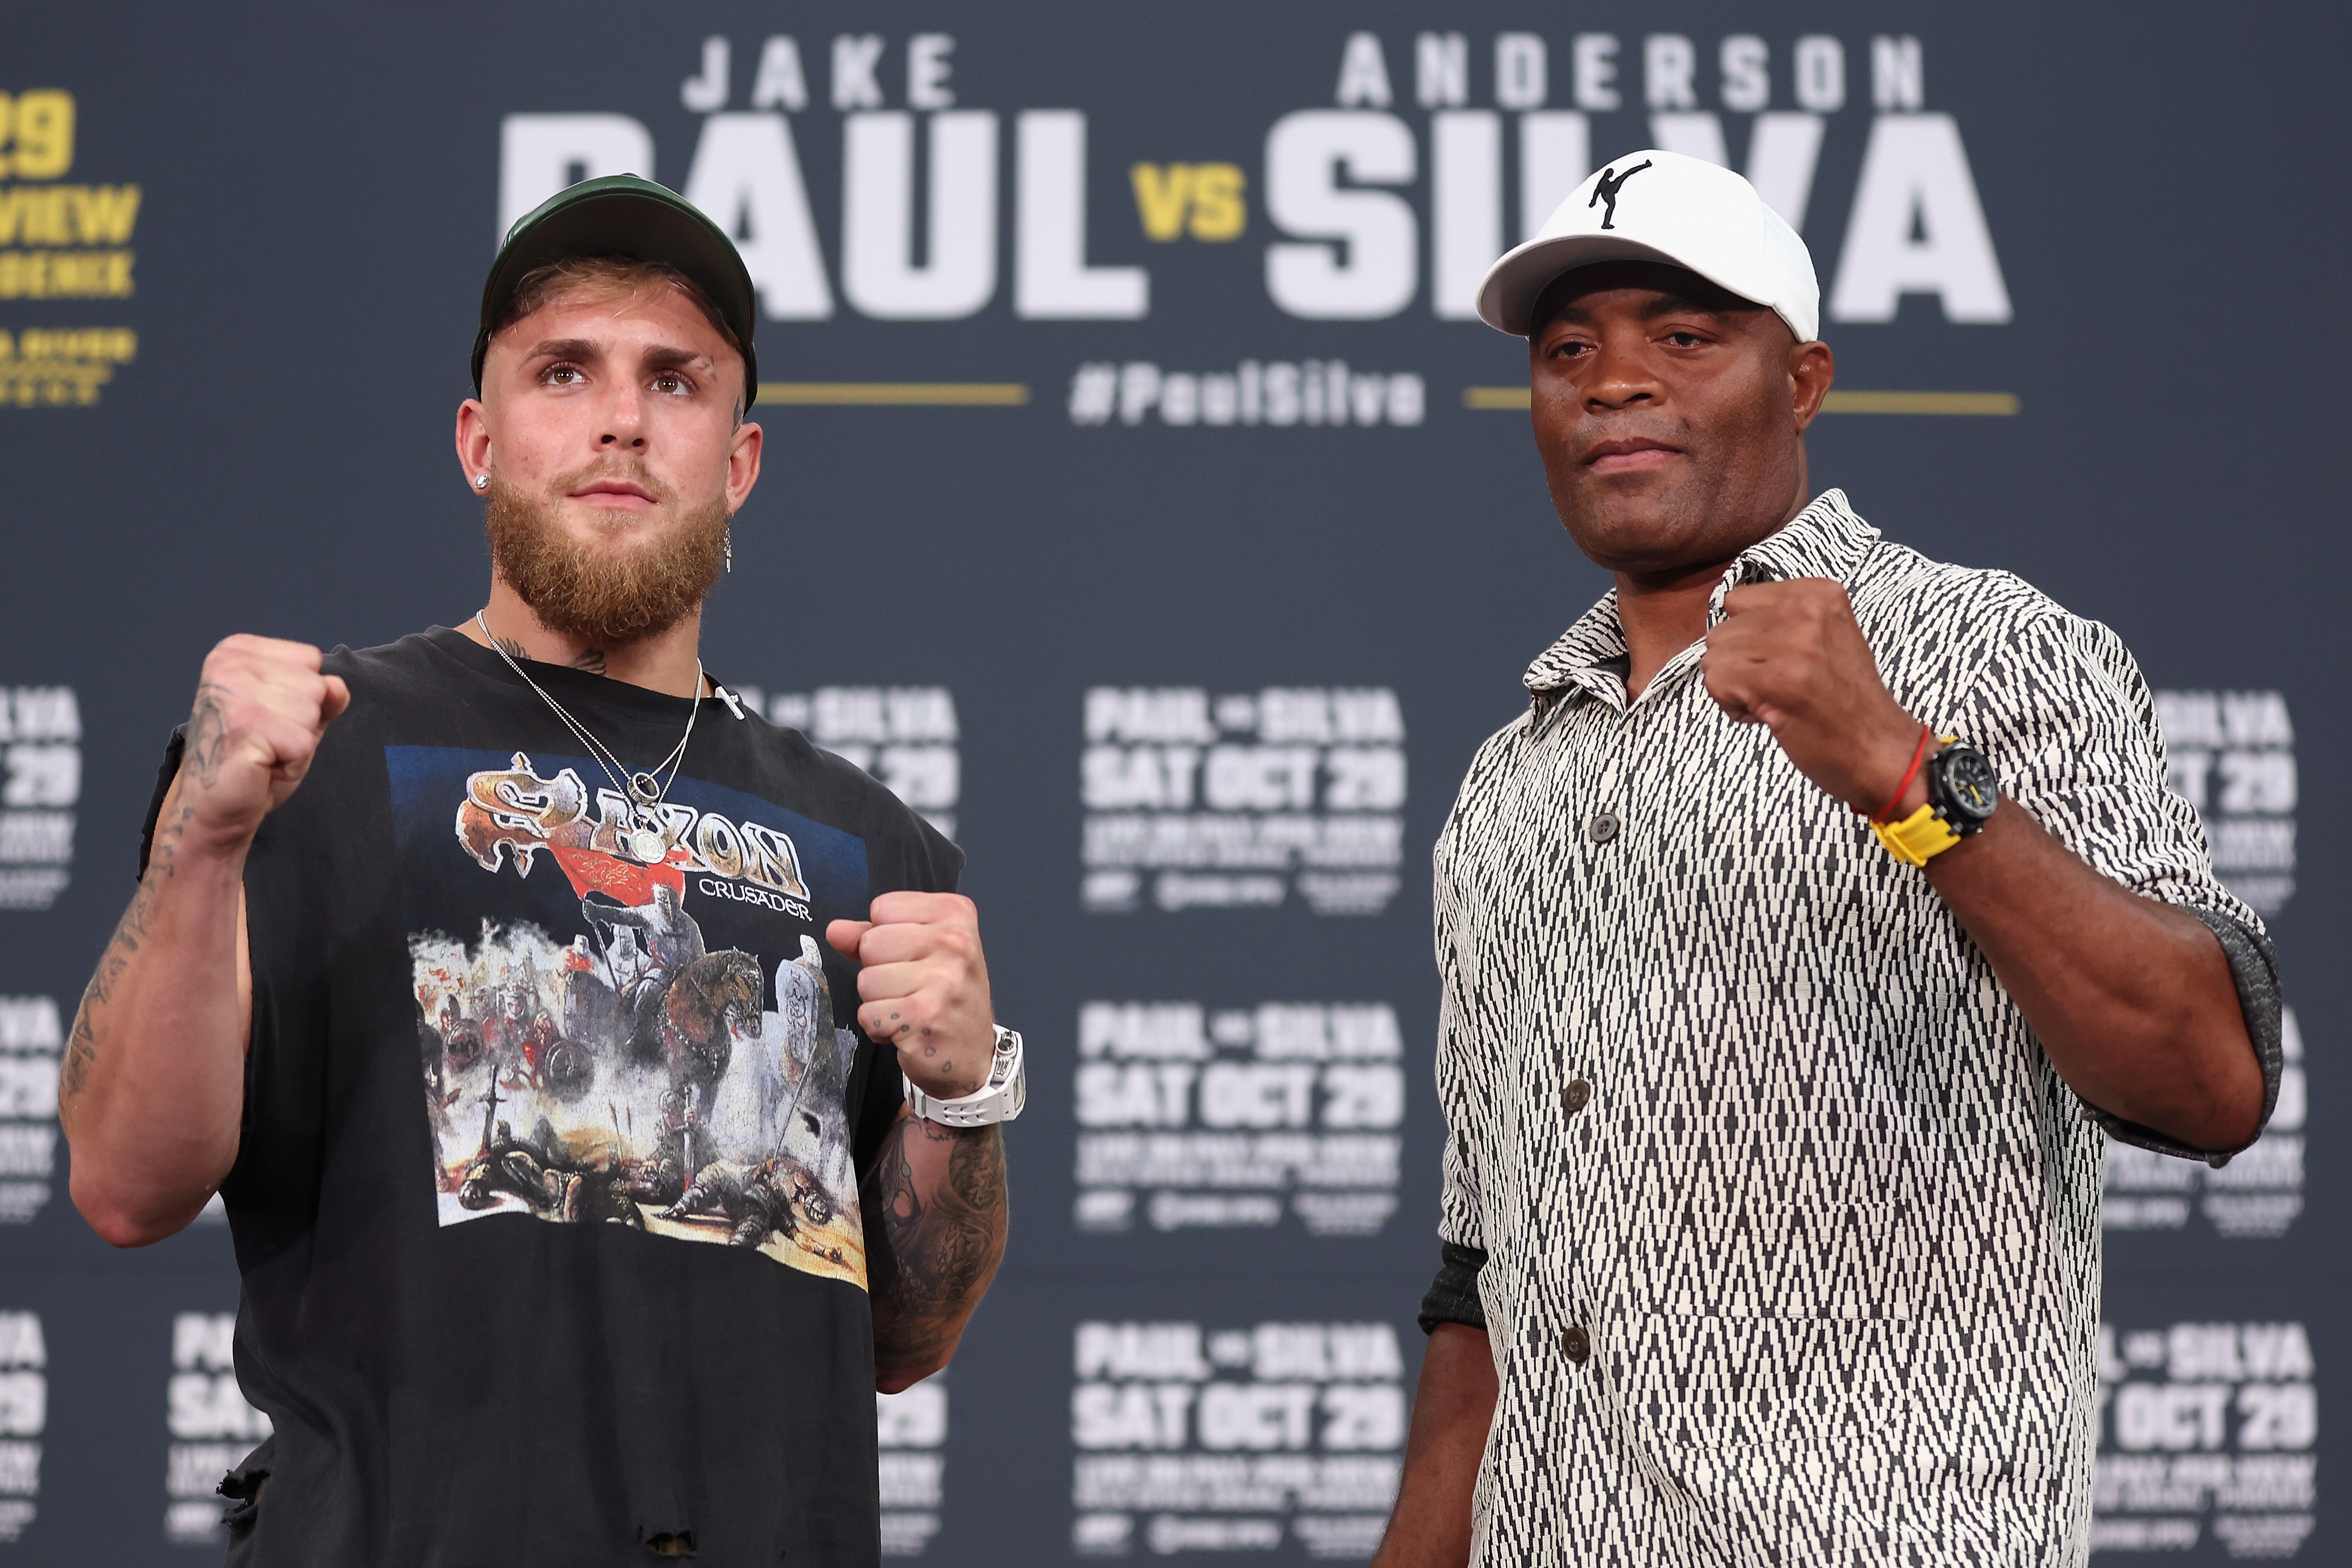 time is the Jake Paul-Anderson Silva tonight? Live stream, how to watch online - al.com